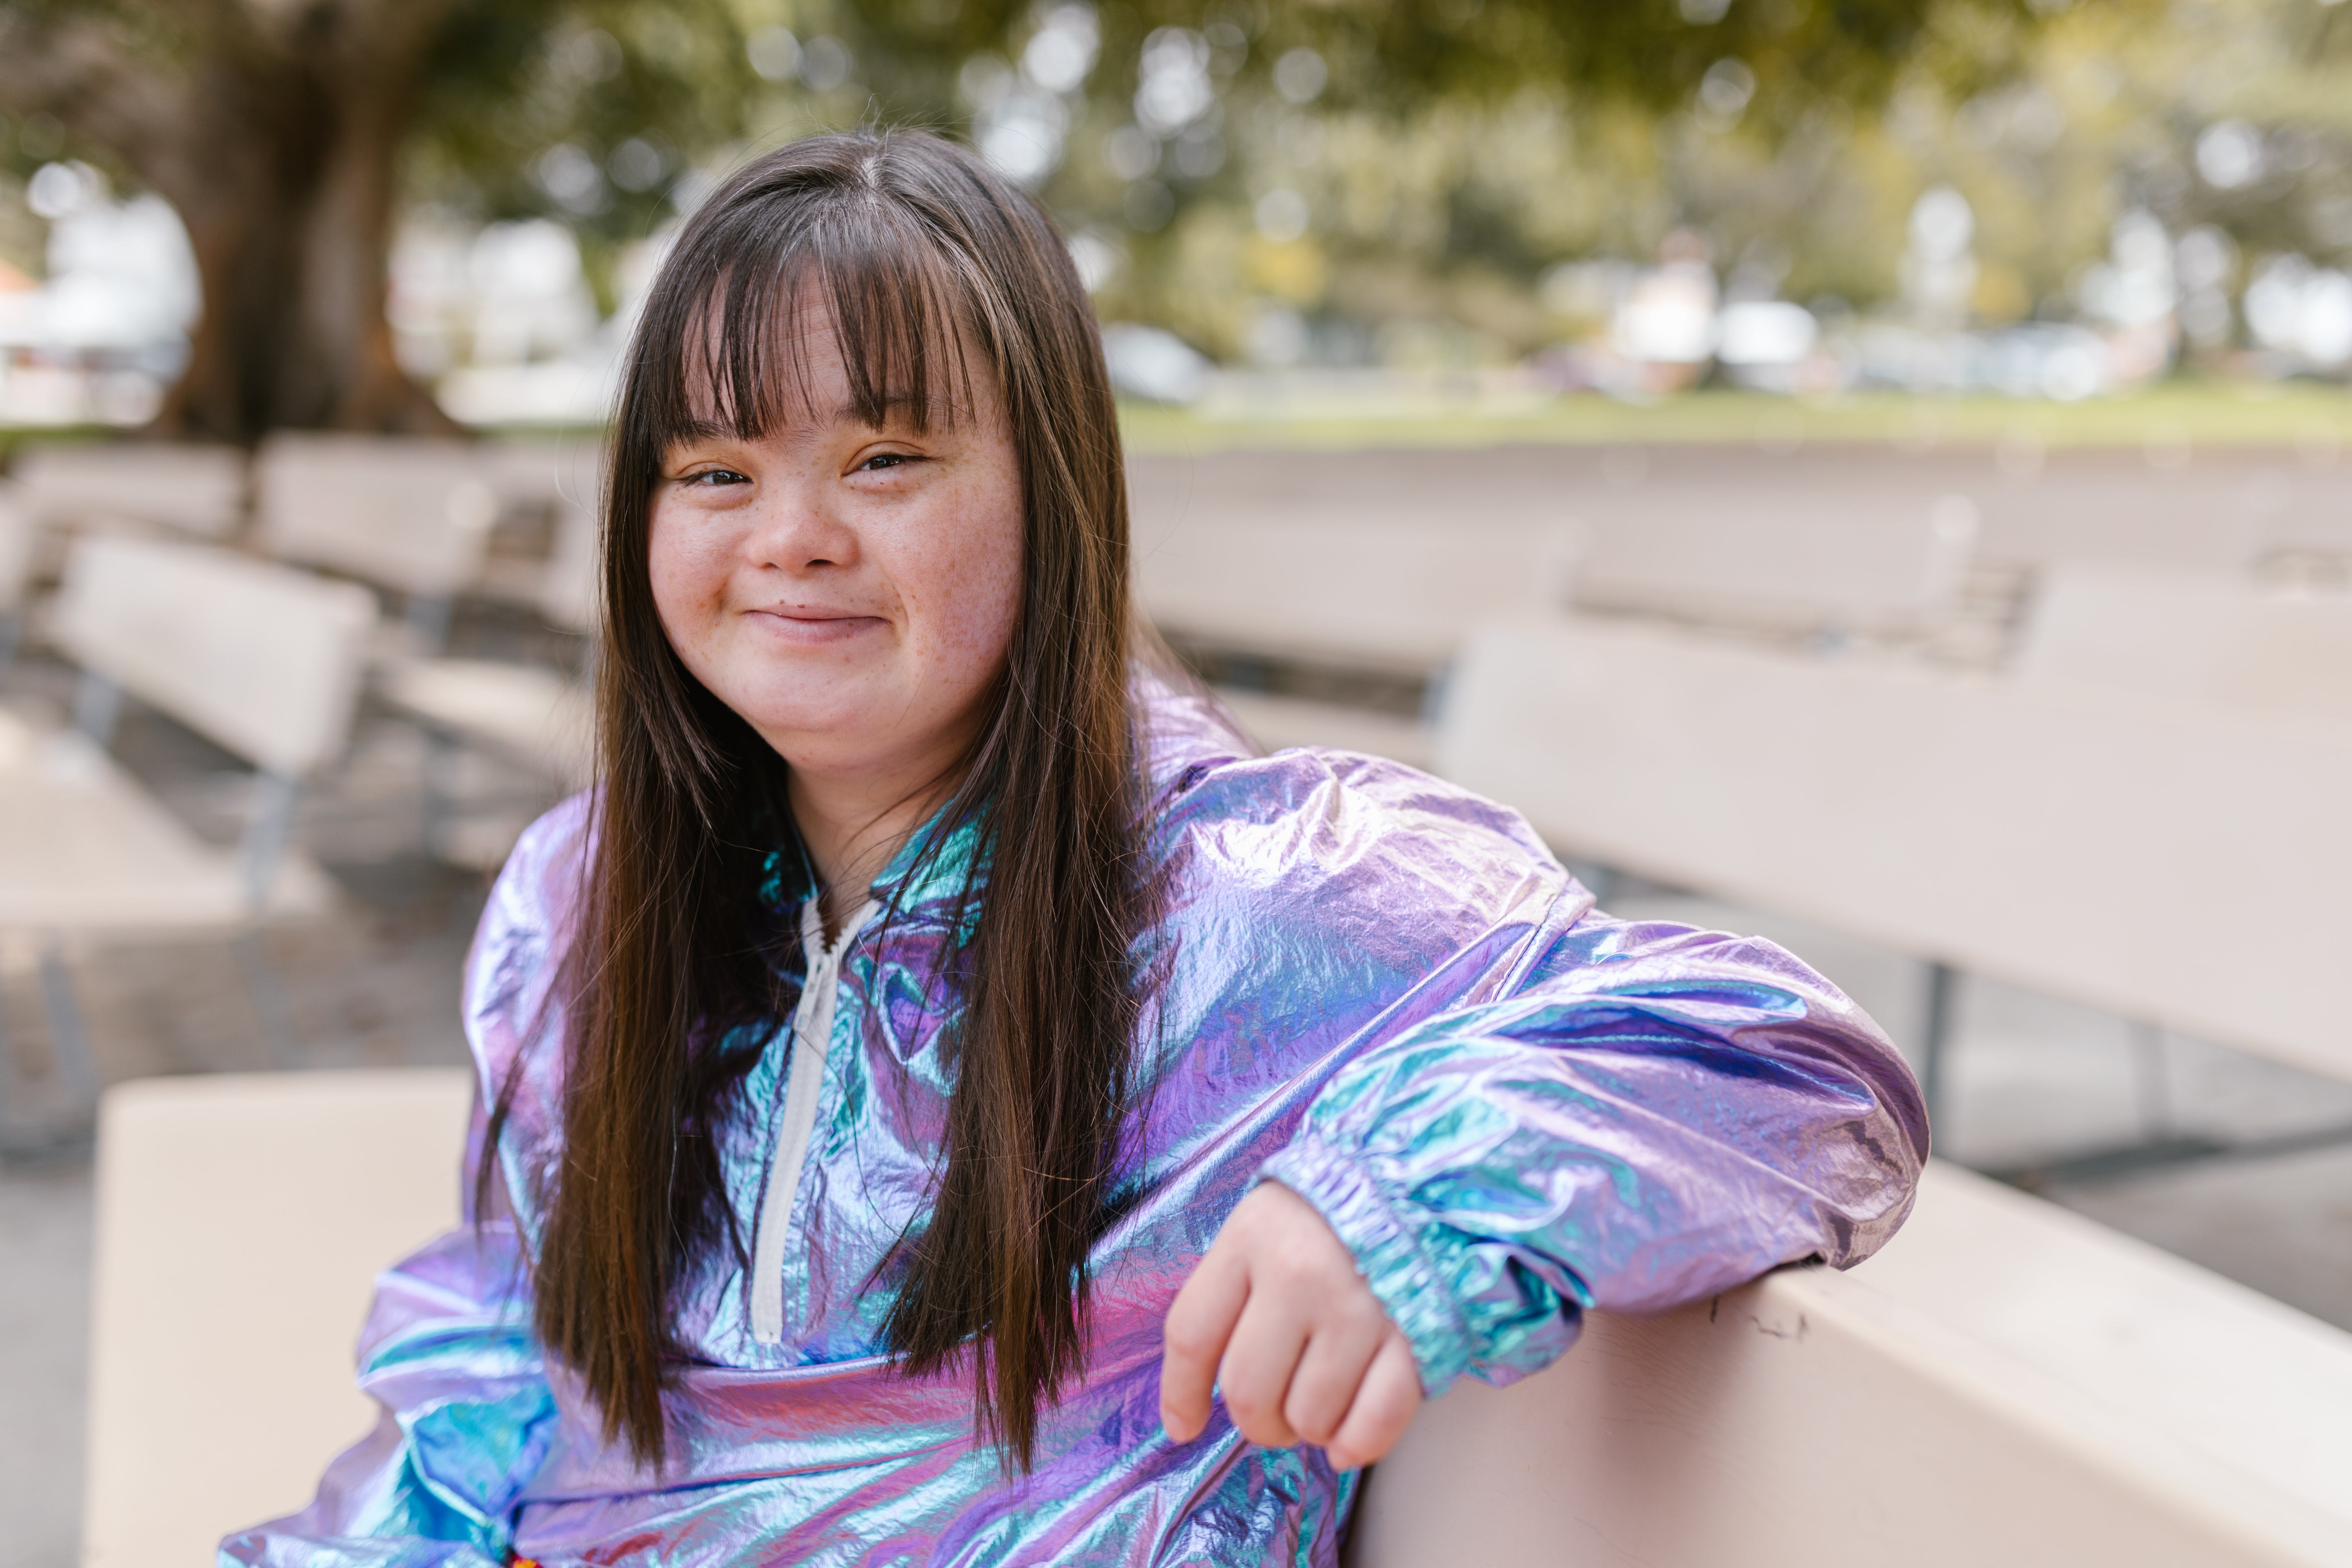 Teen girl with Down Syndrome sitting on bench